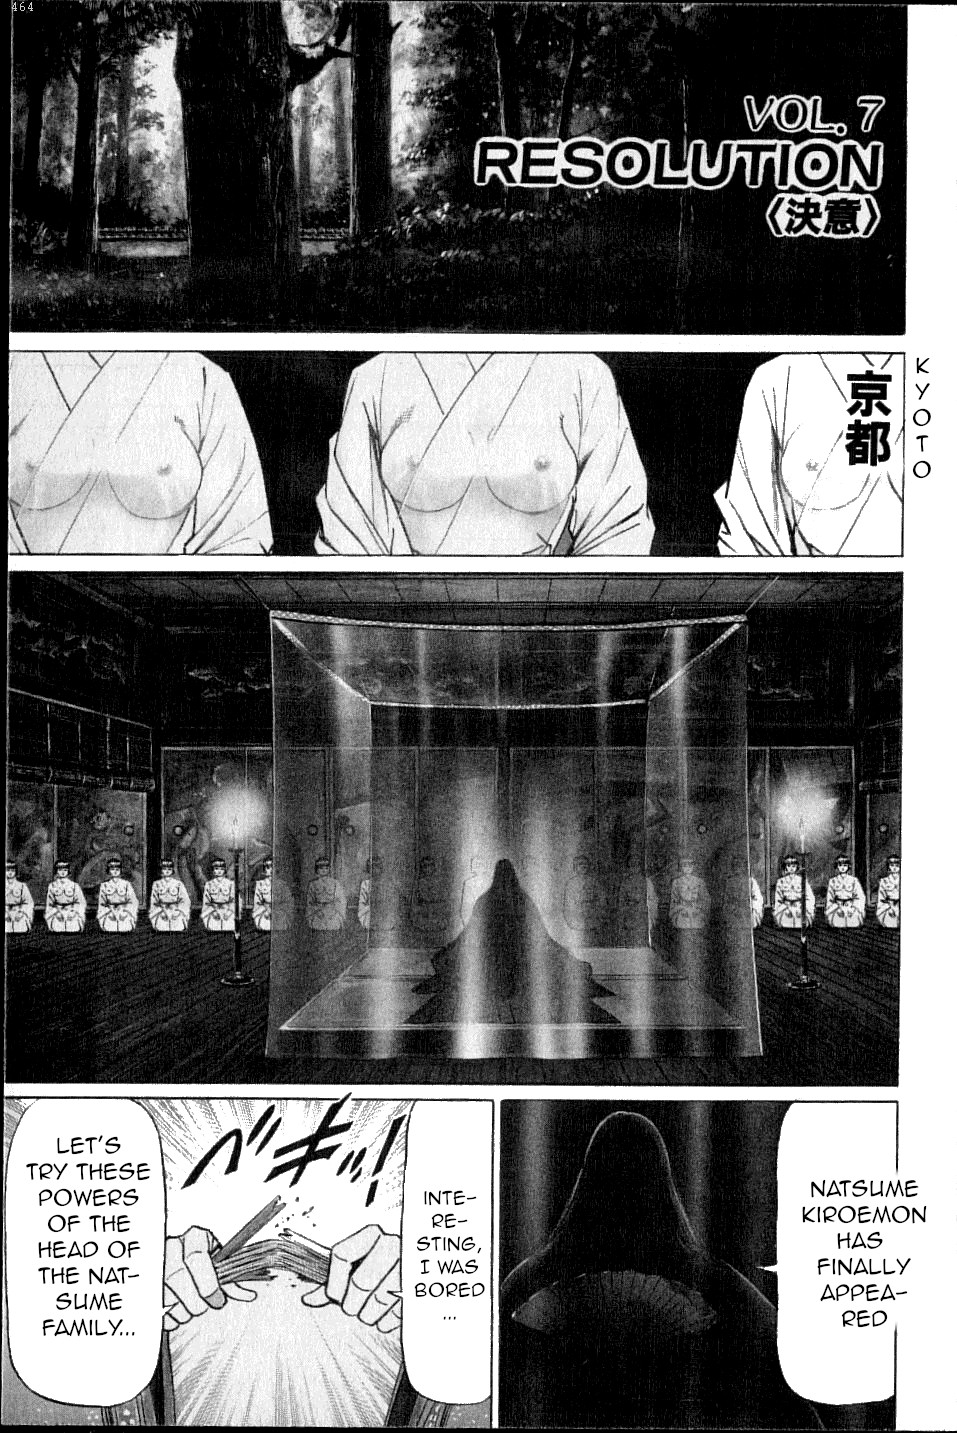 Kouryu No Mimi Vol.1 Chapter 7: Resolution - Picture 1